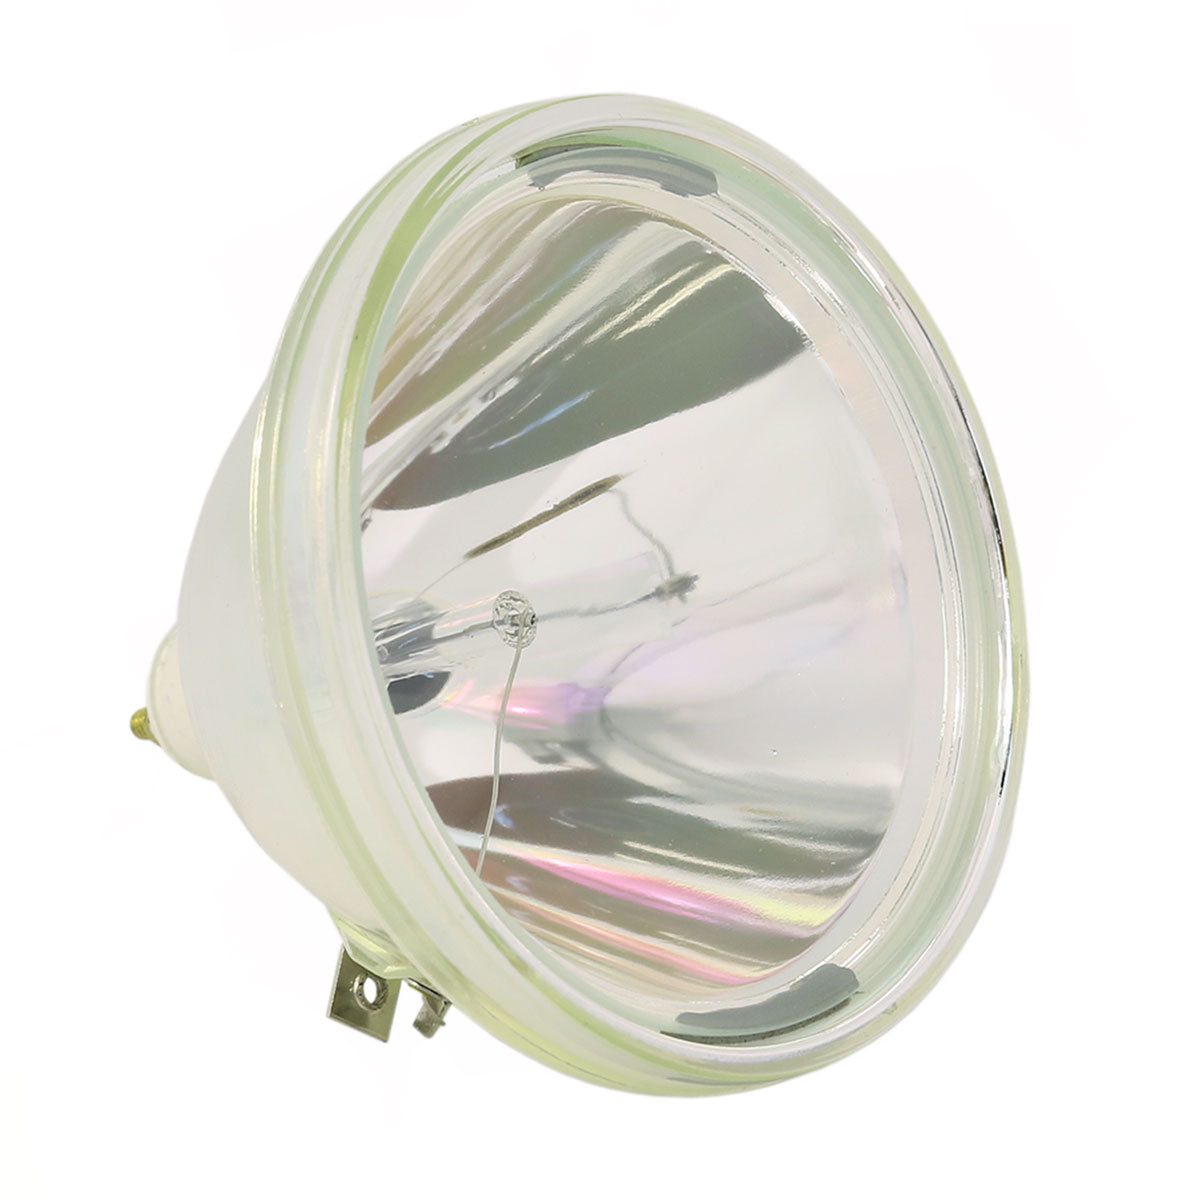 Syntax Olevia LC-T50HV Bare TV Lamp